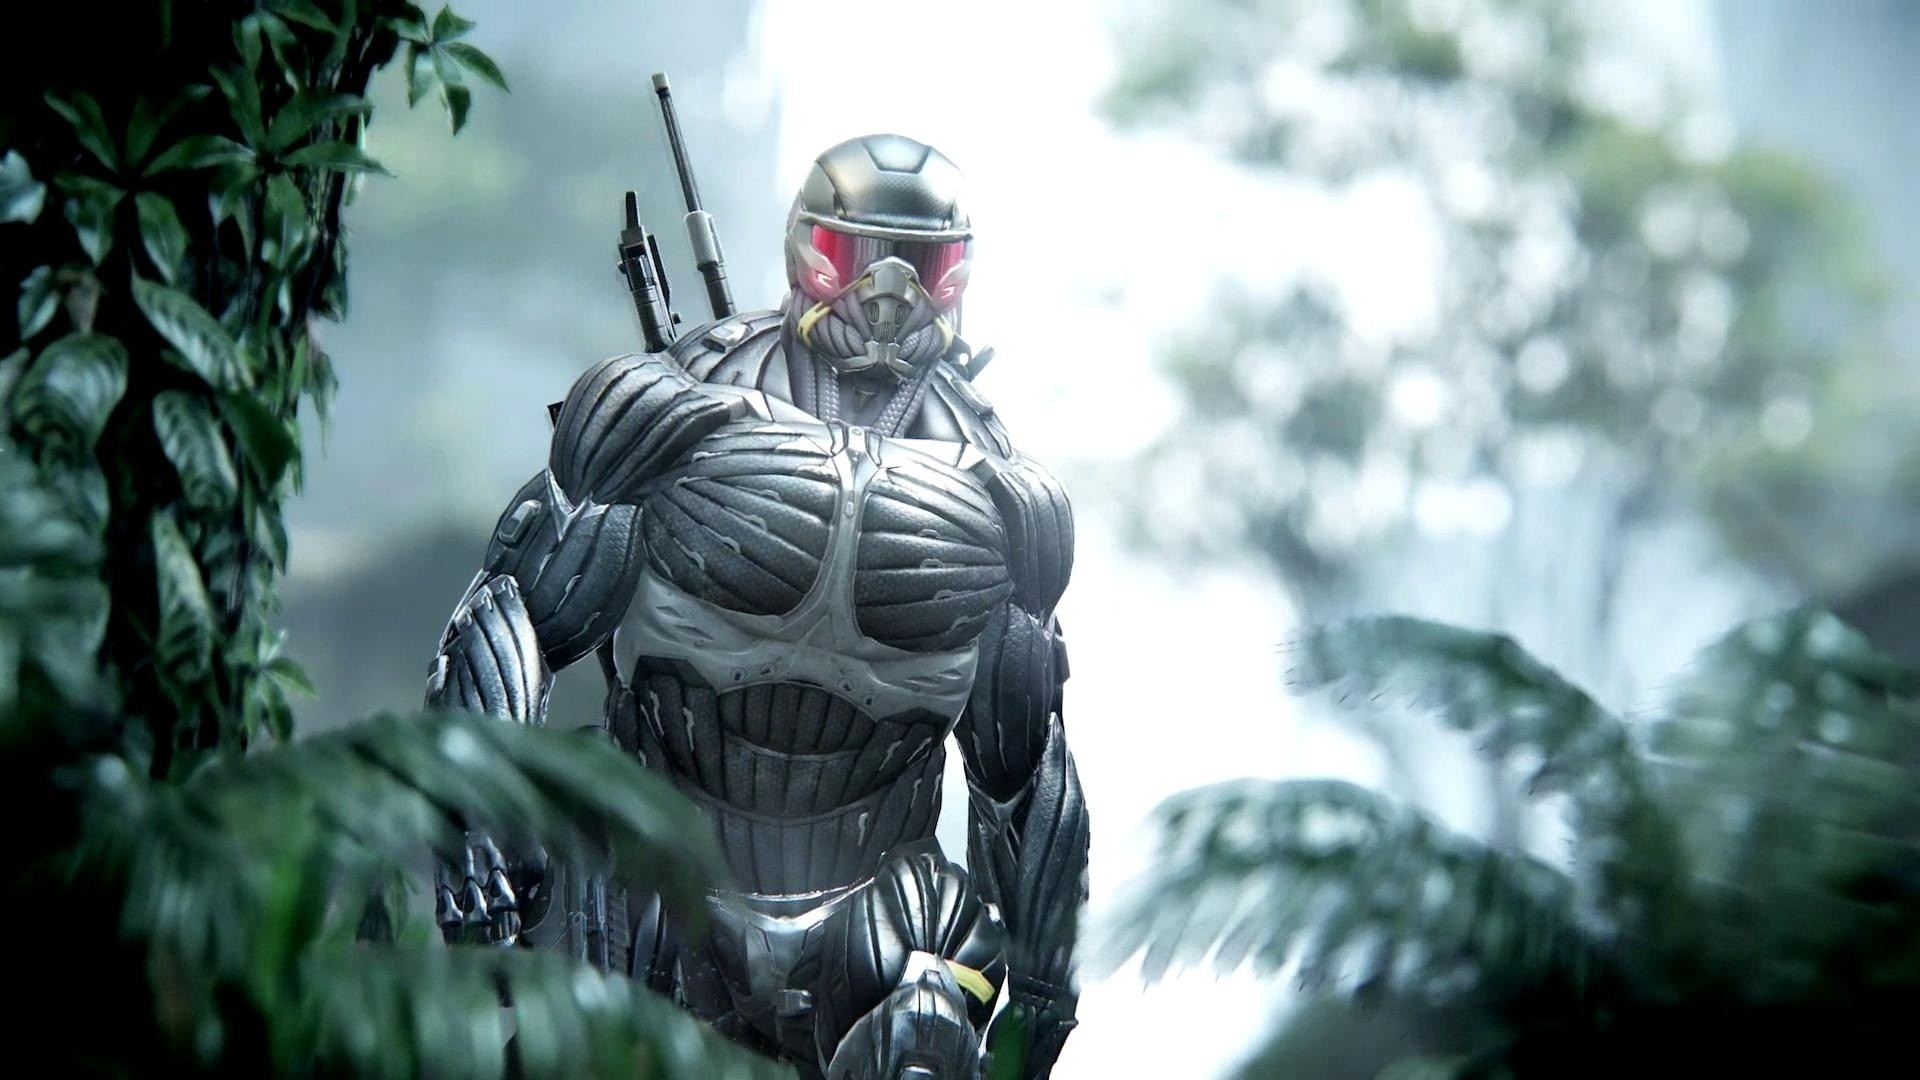 10 Most Popular Crysis 3 Wallpaper Hd FULL HD 1080p For PC Background